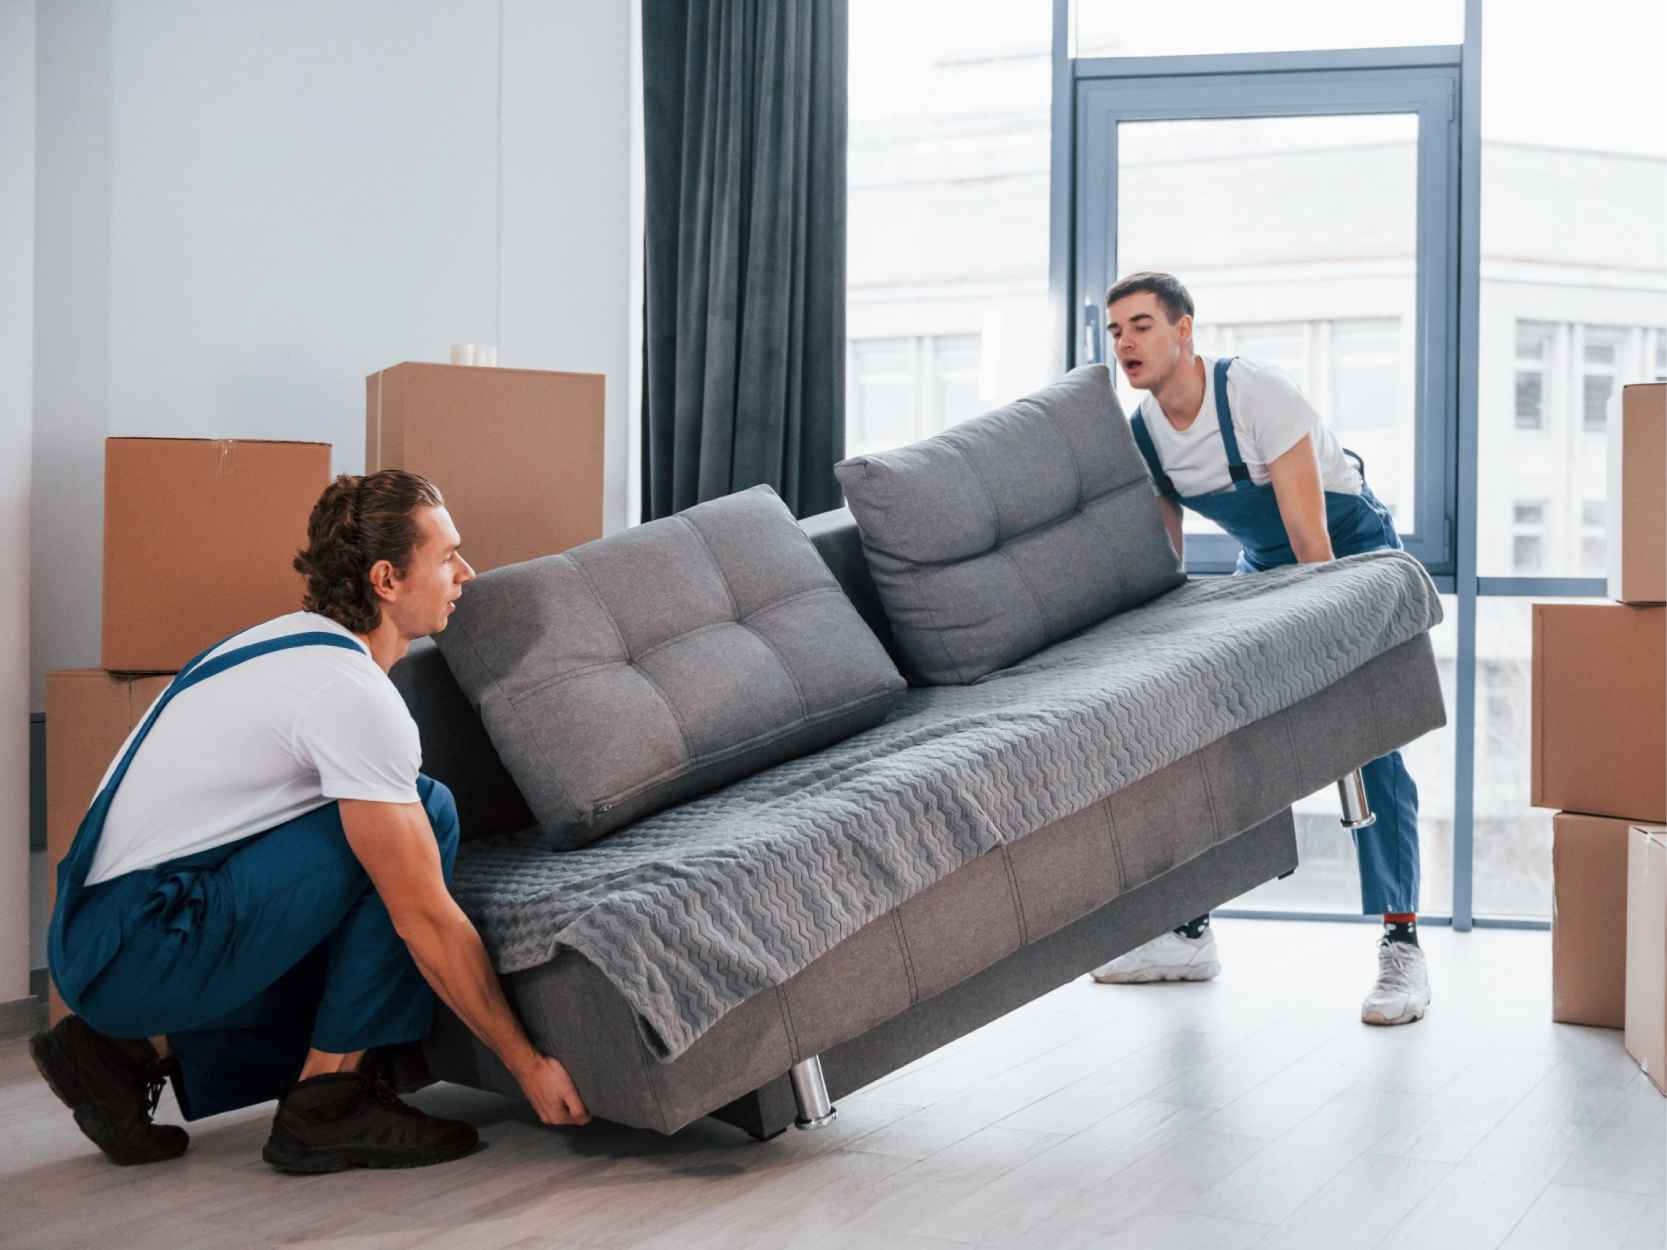 house removalists in Melbourne - shifting furniture